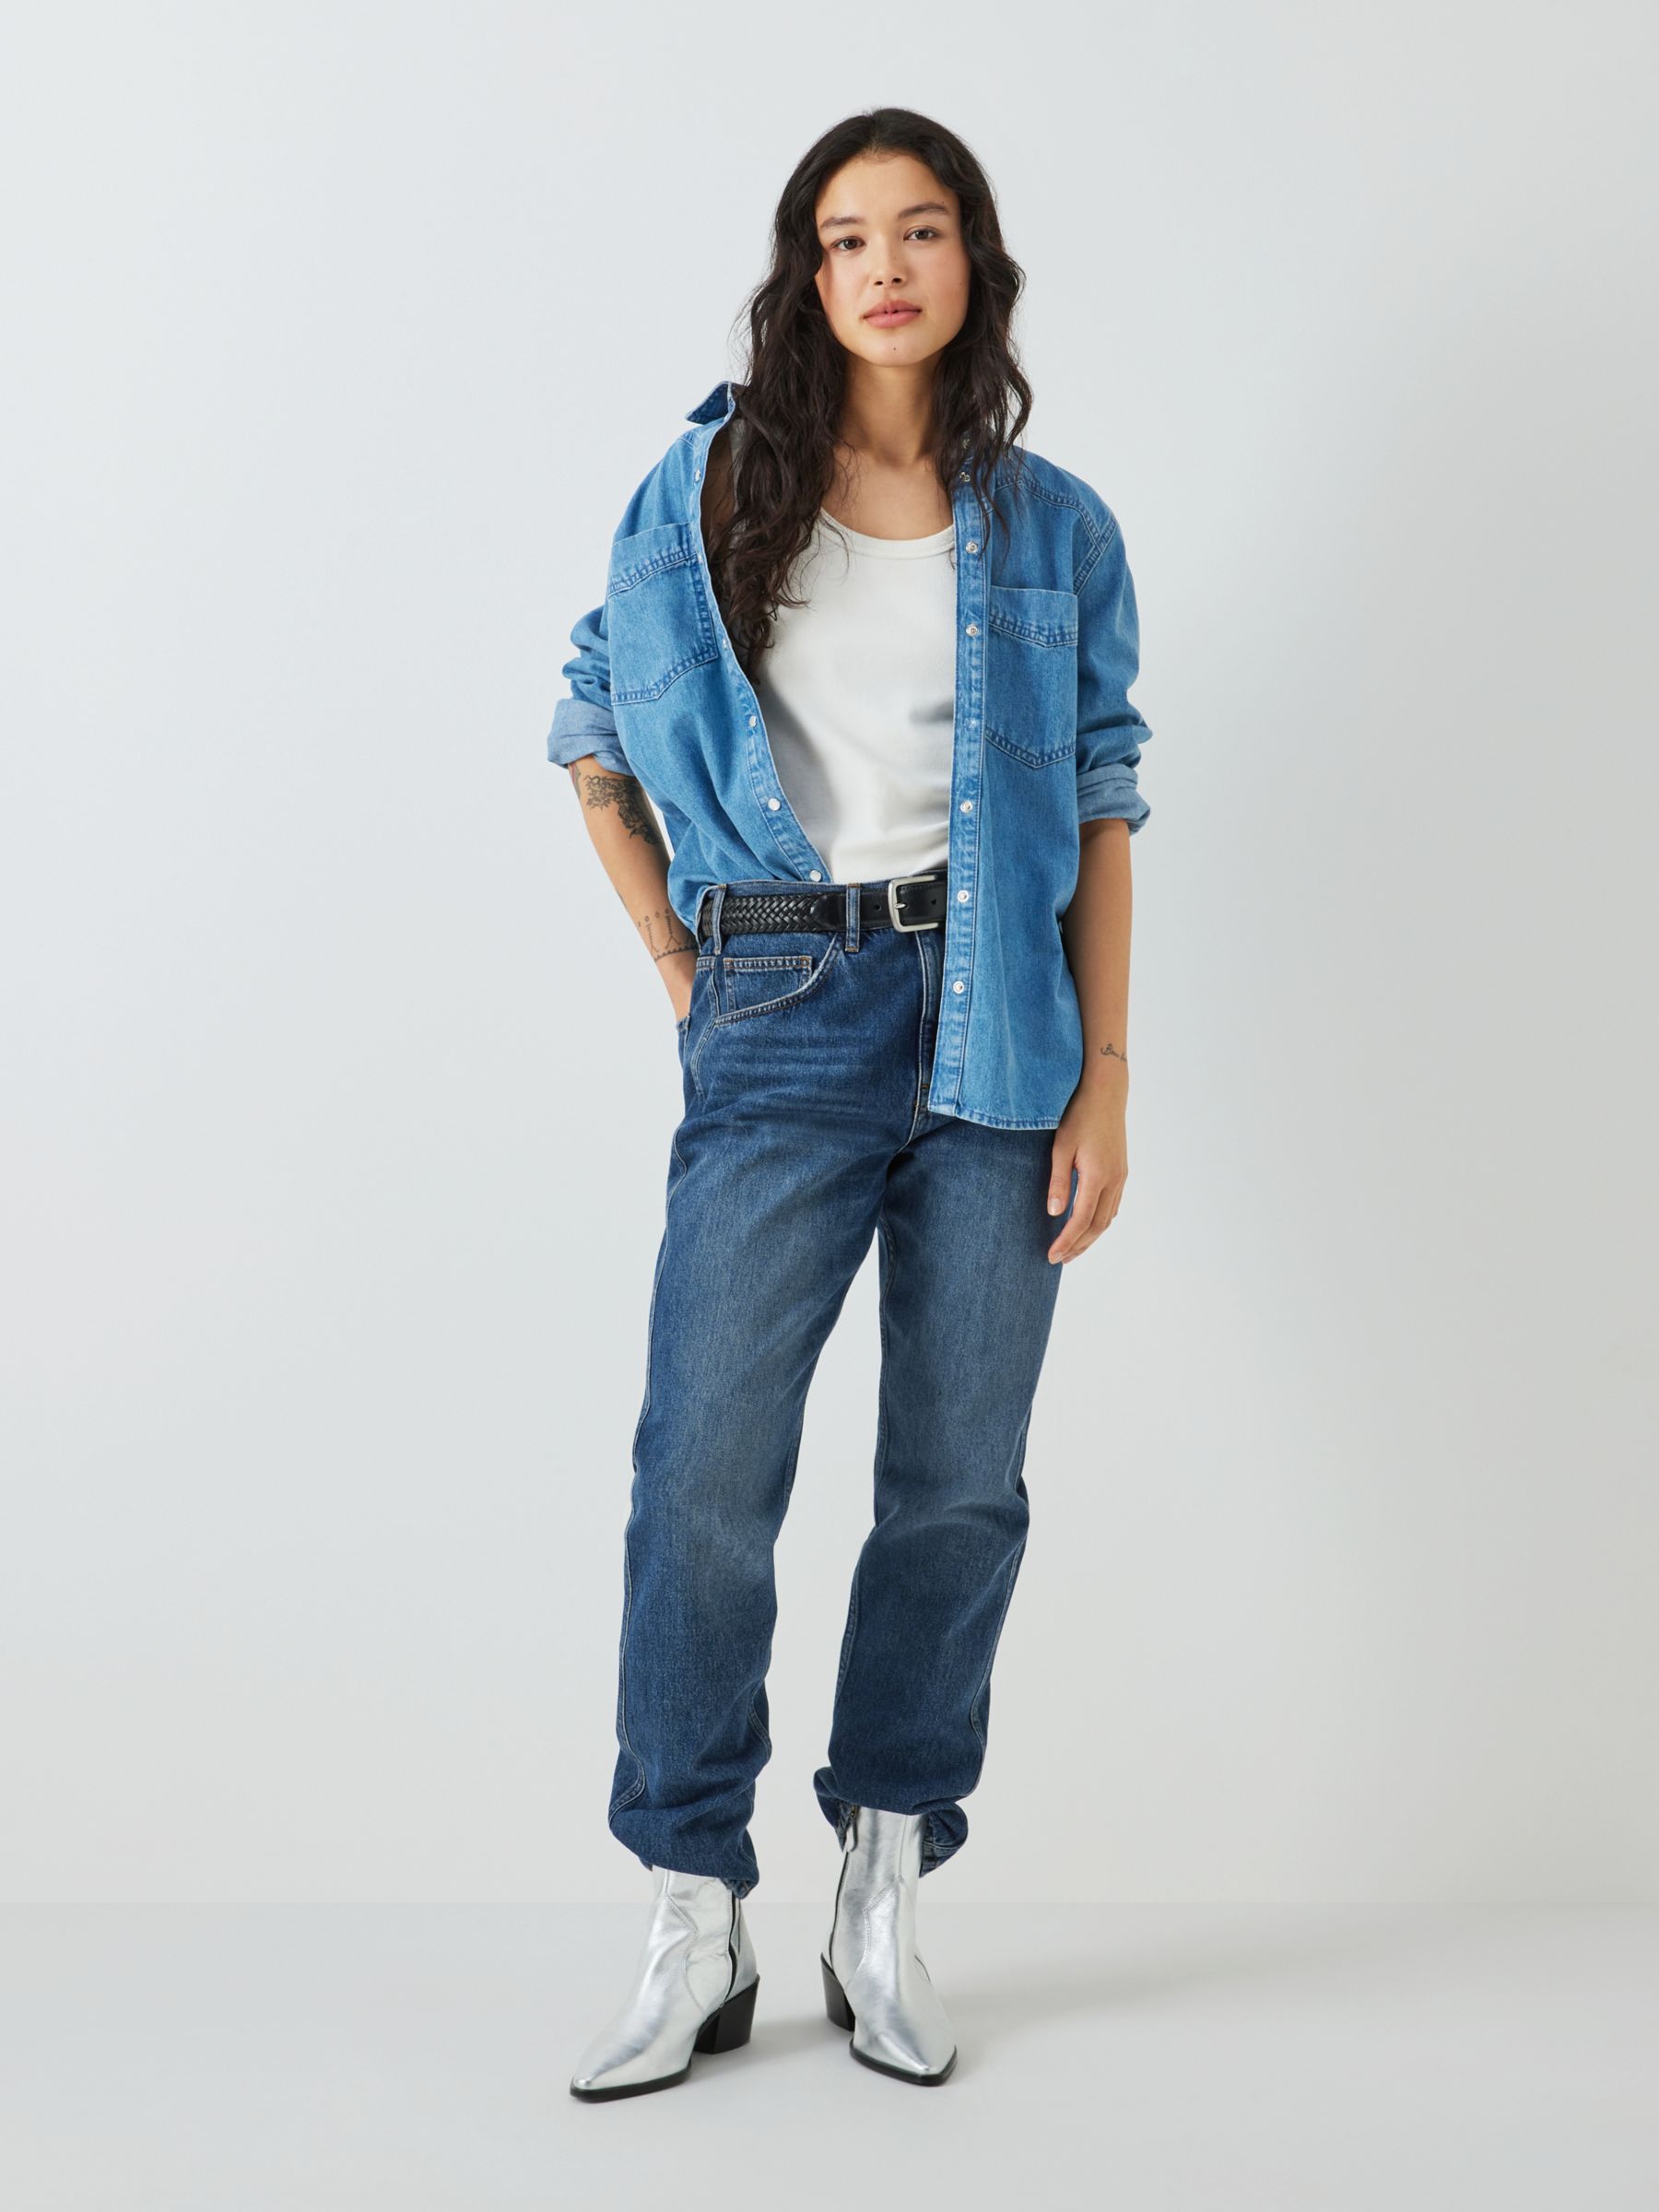 Buy AND/OR Melrose Straight Cut Jeans, Dark Blue Wash Online at johnlewis.com